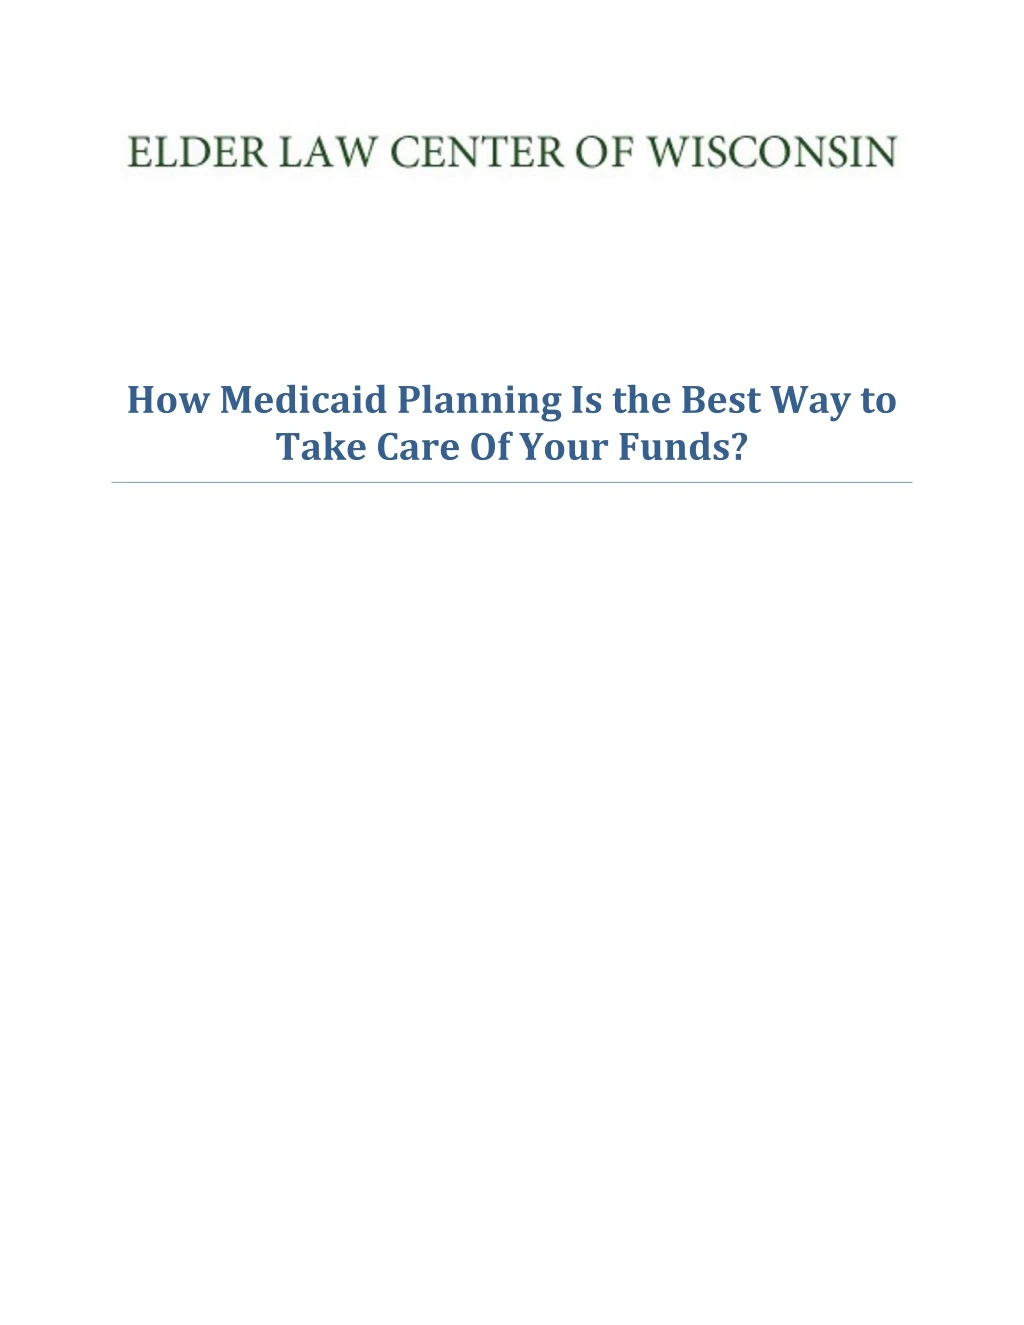 how medicaid planning is the best way to take